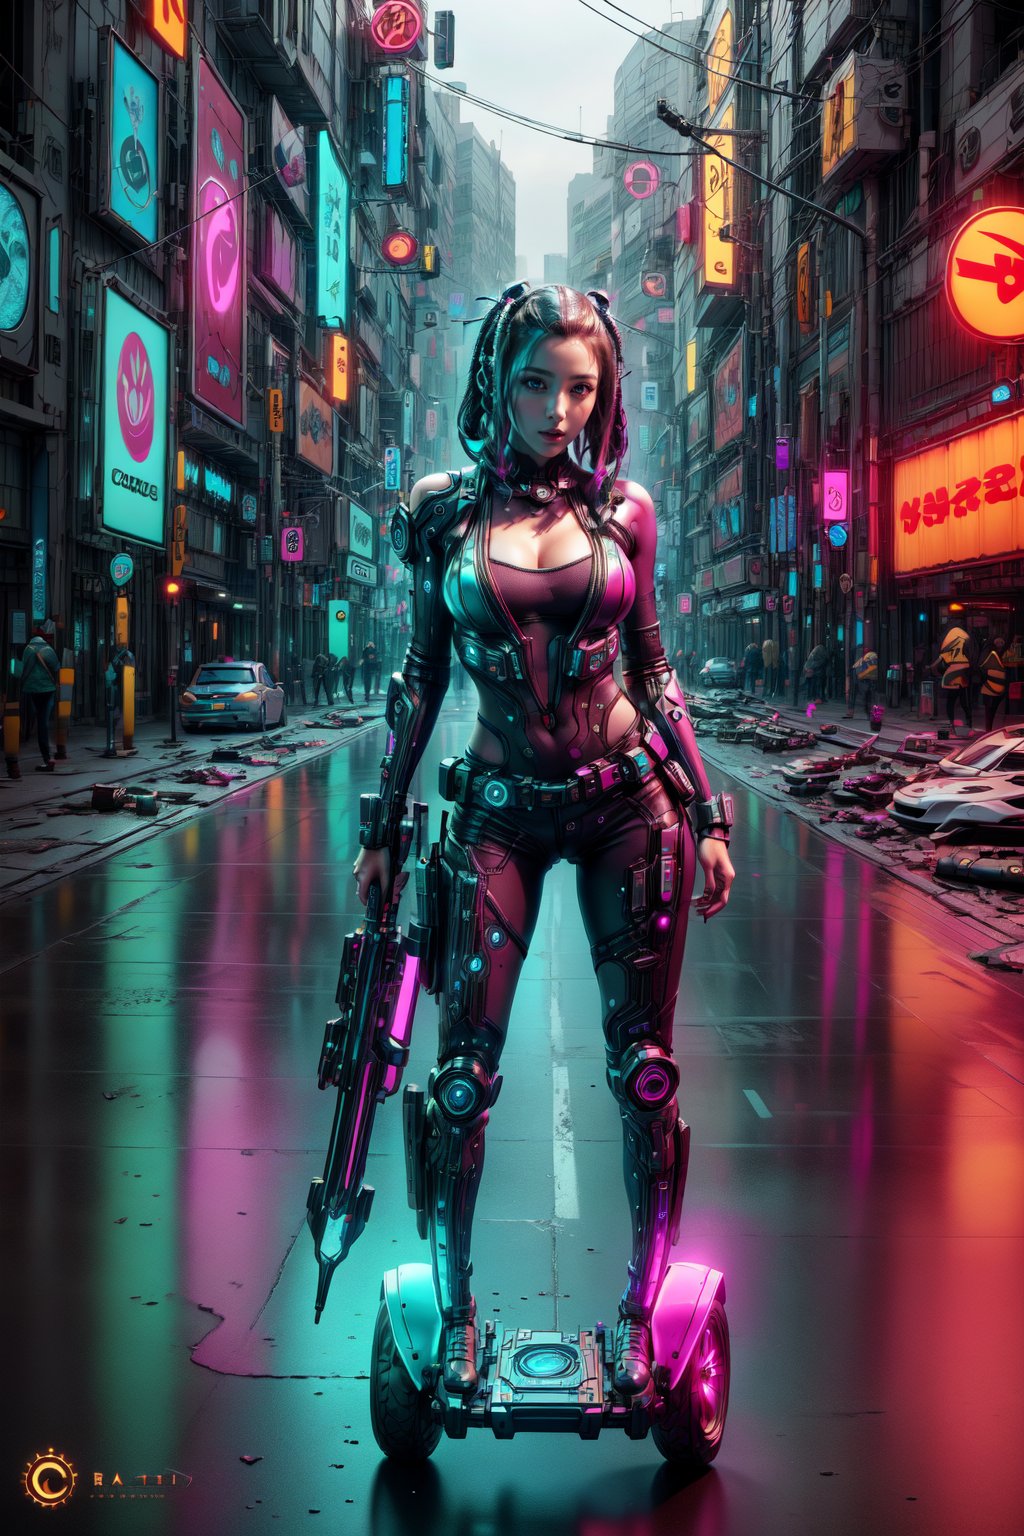 Cyberpunk style props, Enter a futuristic world with these unique cyberpunk style props. From neon-lit hoverboards to sleek, metallic weapons, let your imagination run wild with this diverse range of props.